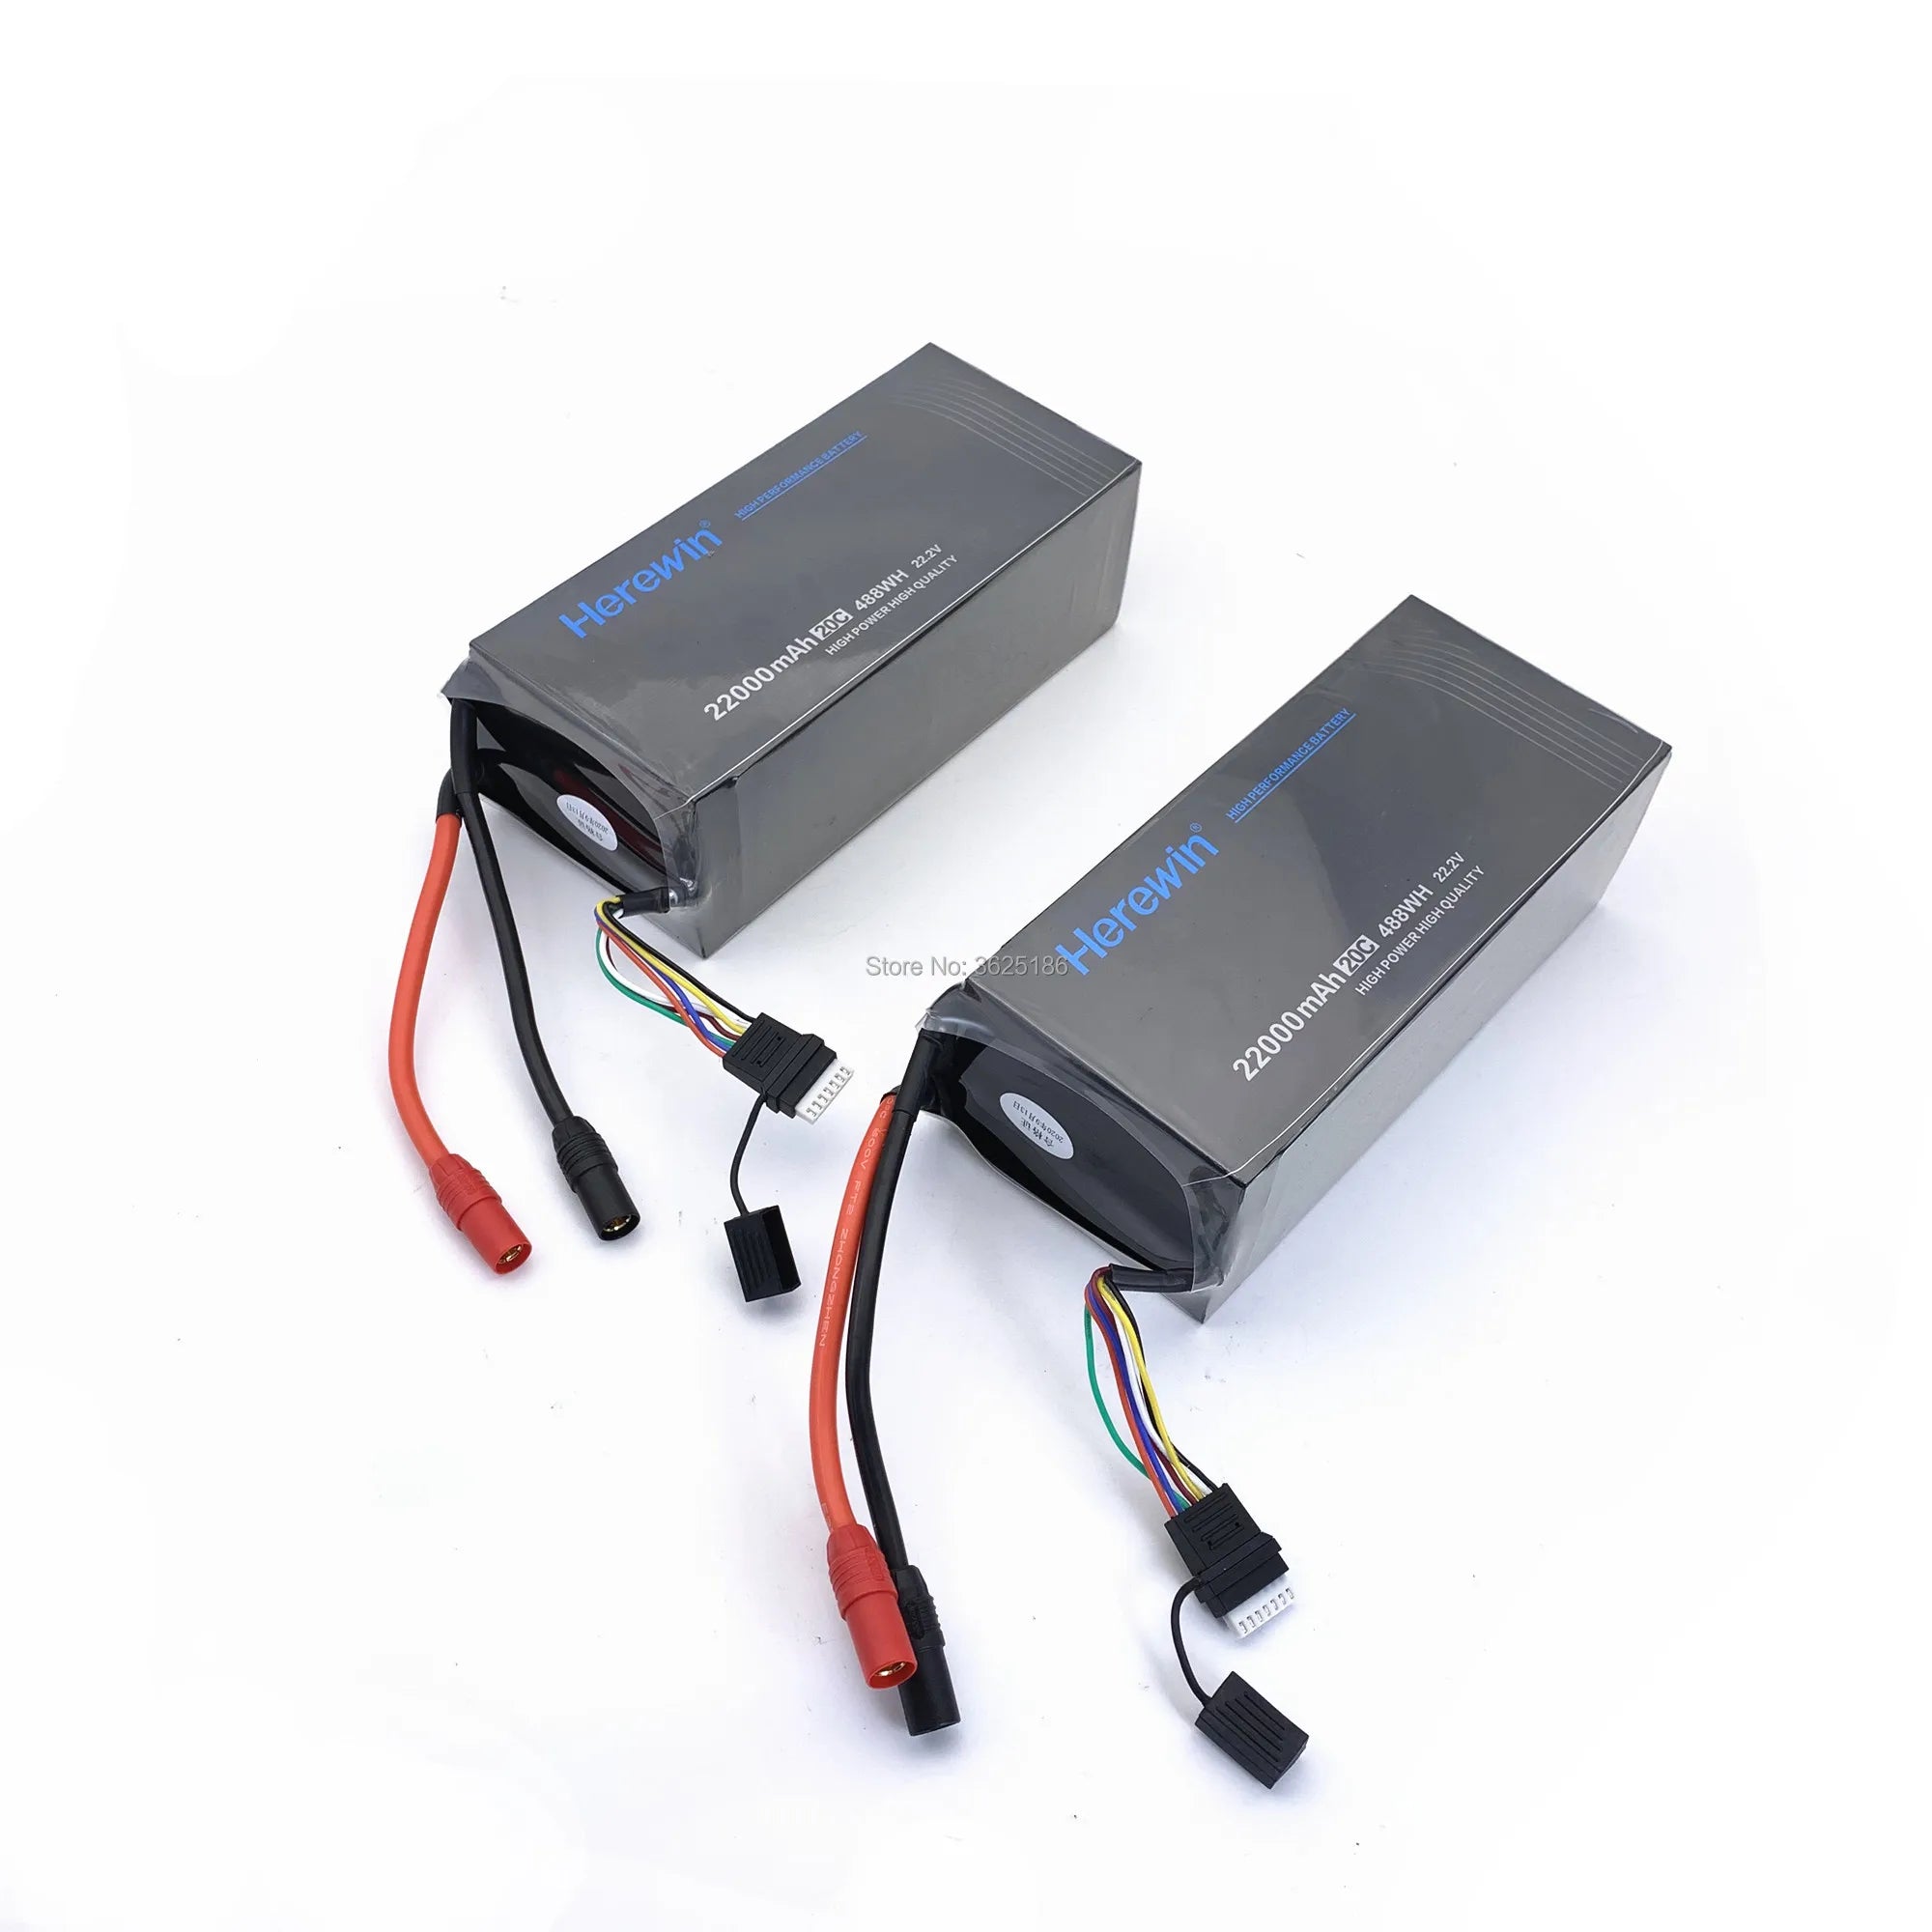 Herewin 6s 22000mah 22.2v 20C Agriculture Drone Battery, Store No: 362518 Herewin 222v 'Highpower High Quality 488